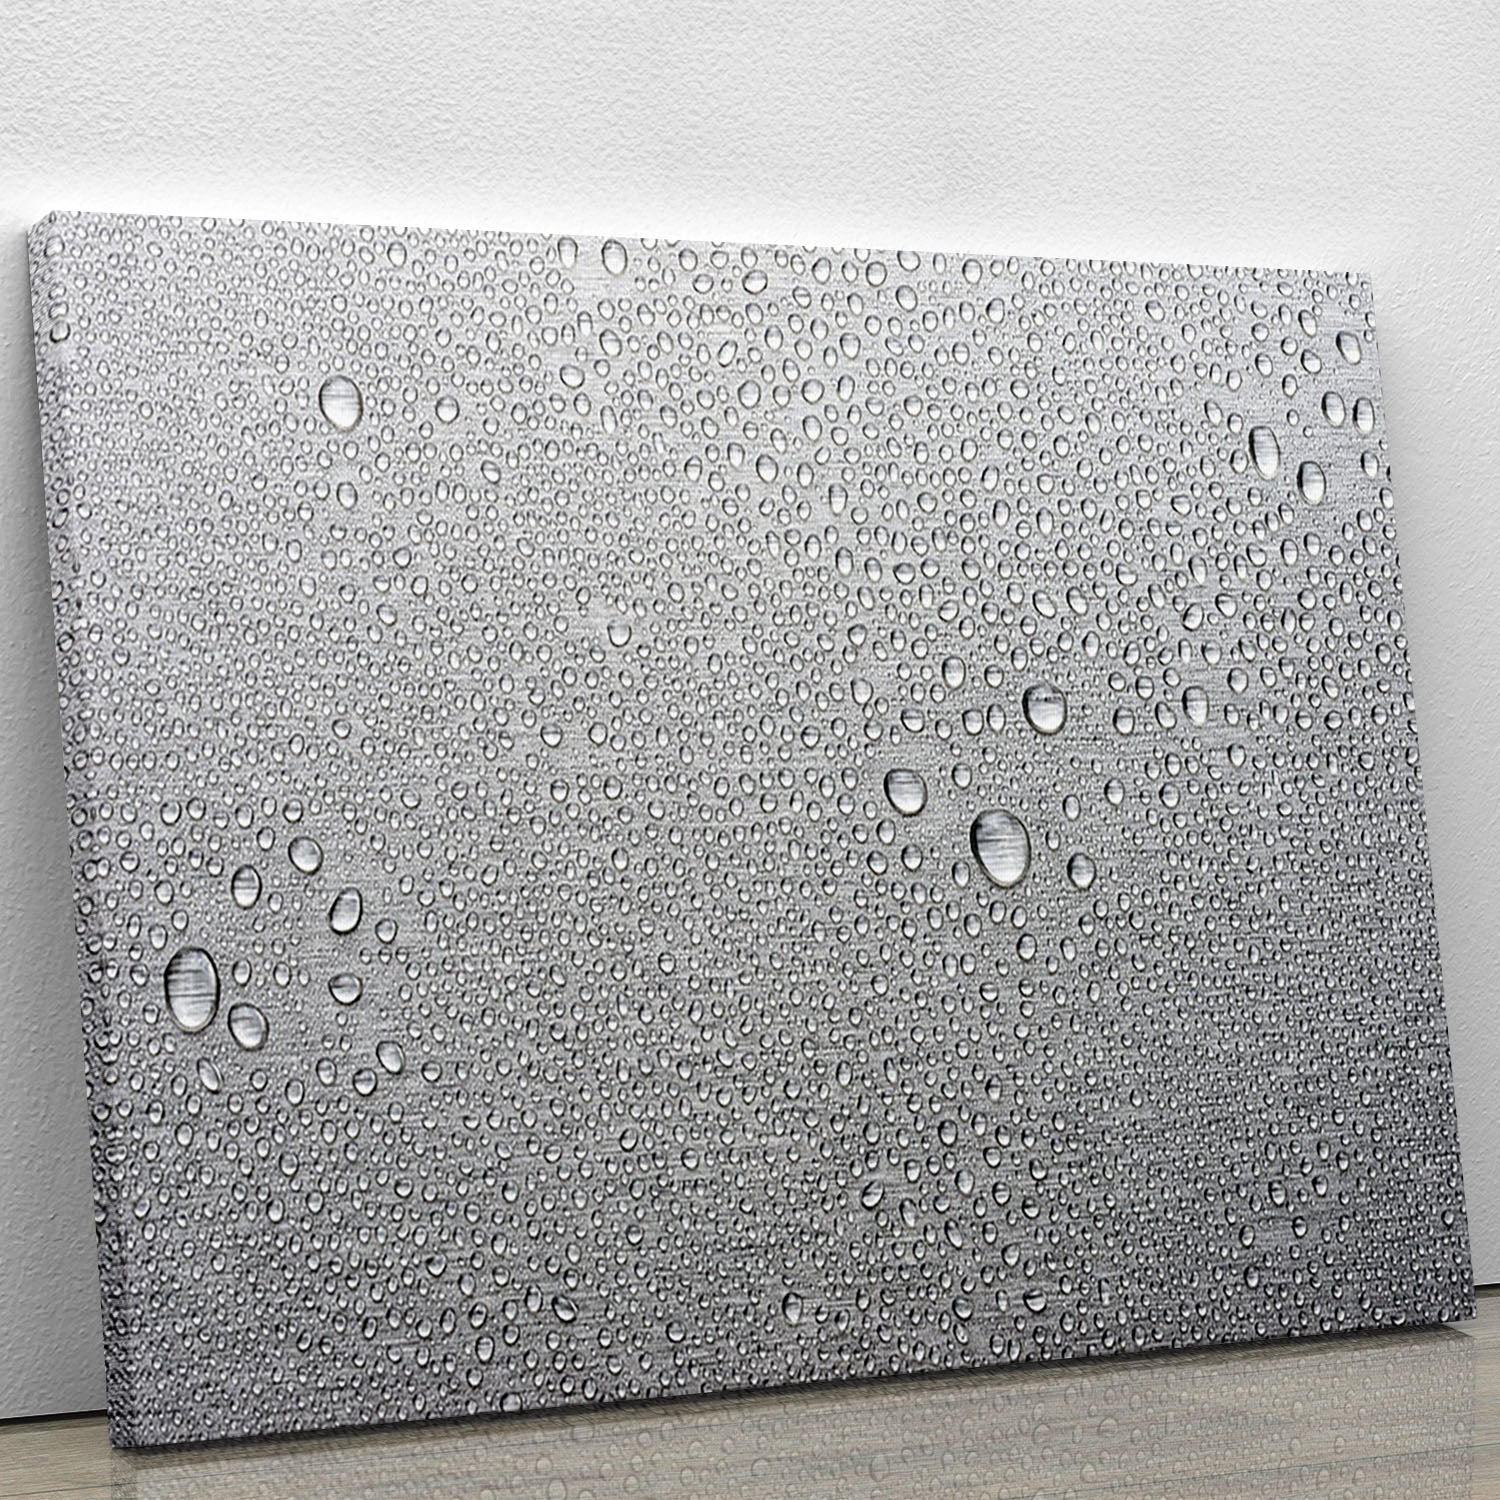 Brushed metal surface with water Canvas Print or Poster